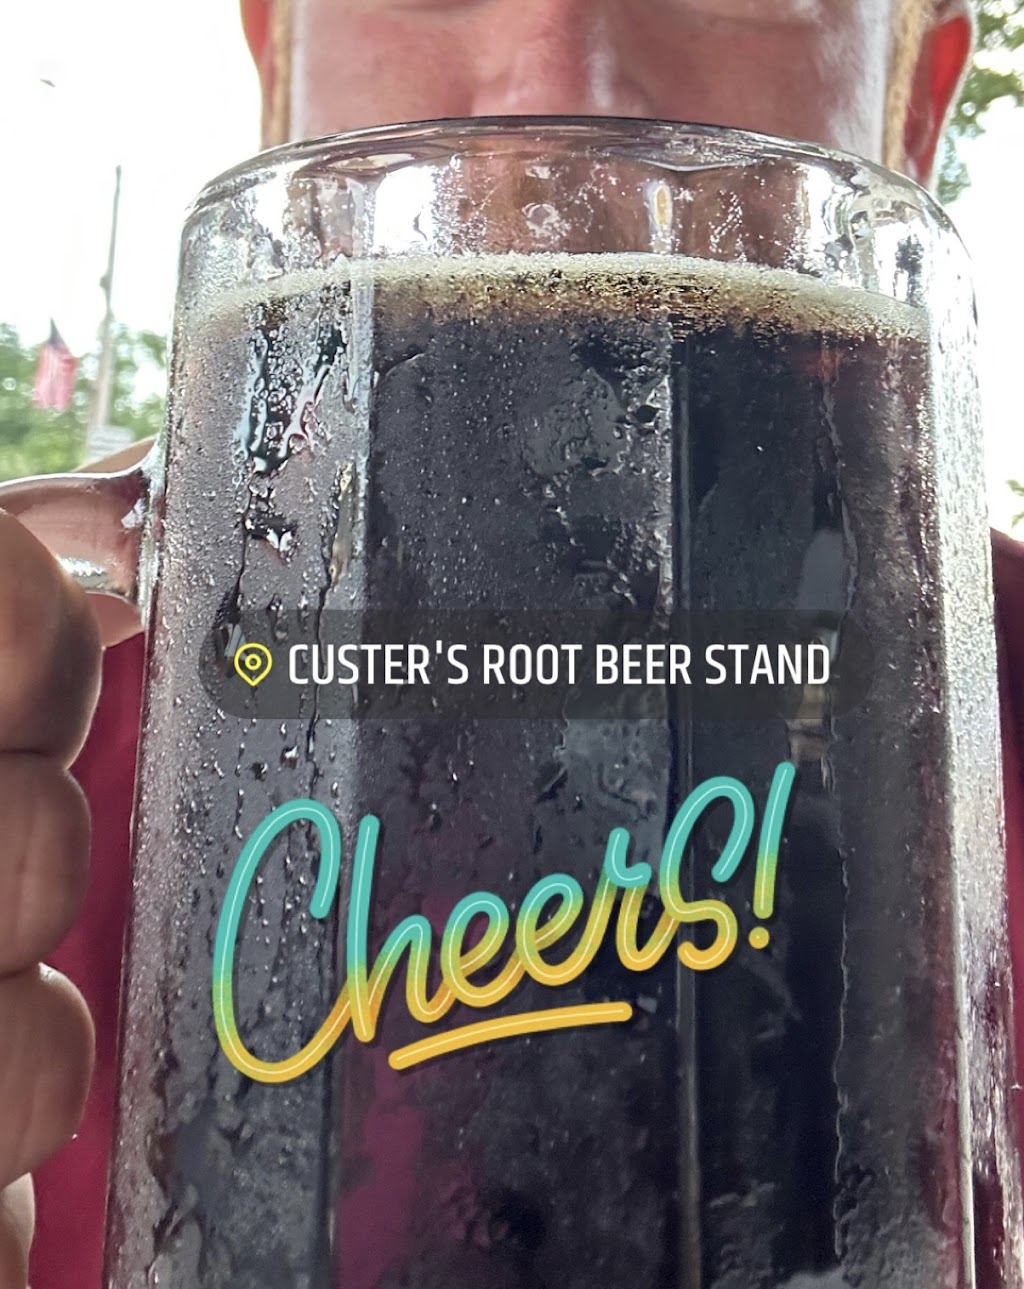 Custers Root Beer Stand | restaurant | 410 2nd St, Chetek, WI 54728, USA